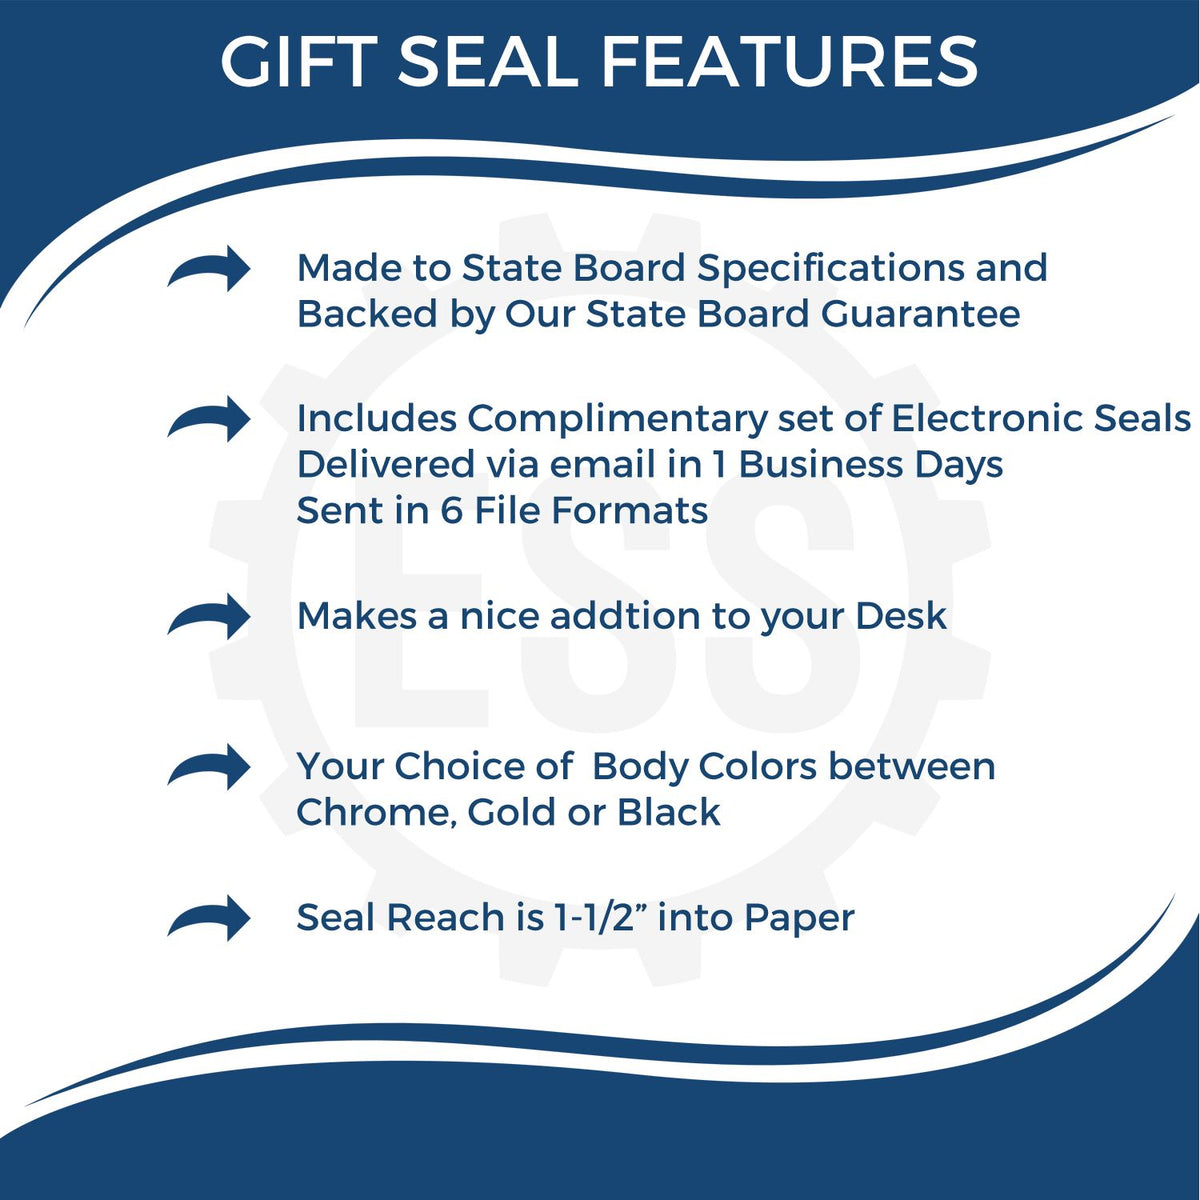 A picture of an infographic highlighting the selling points for the Gift Massachusetts Land Surveyor Seal